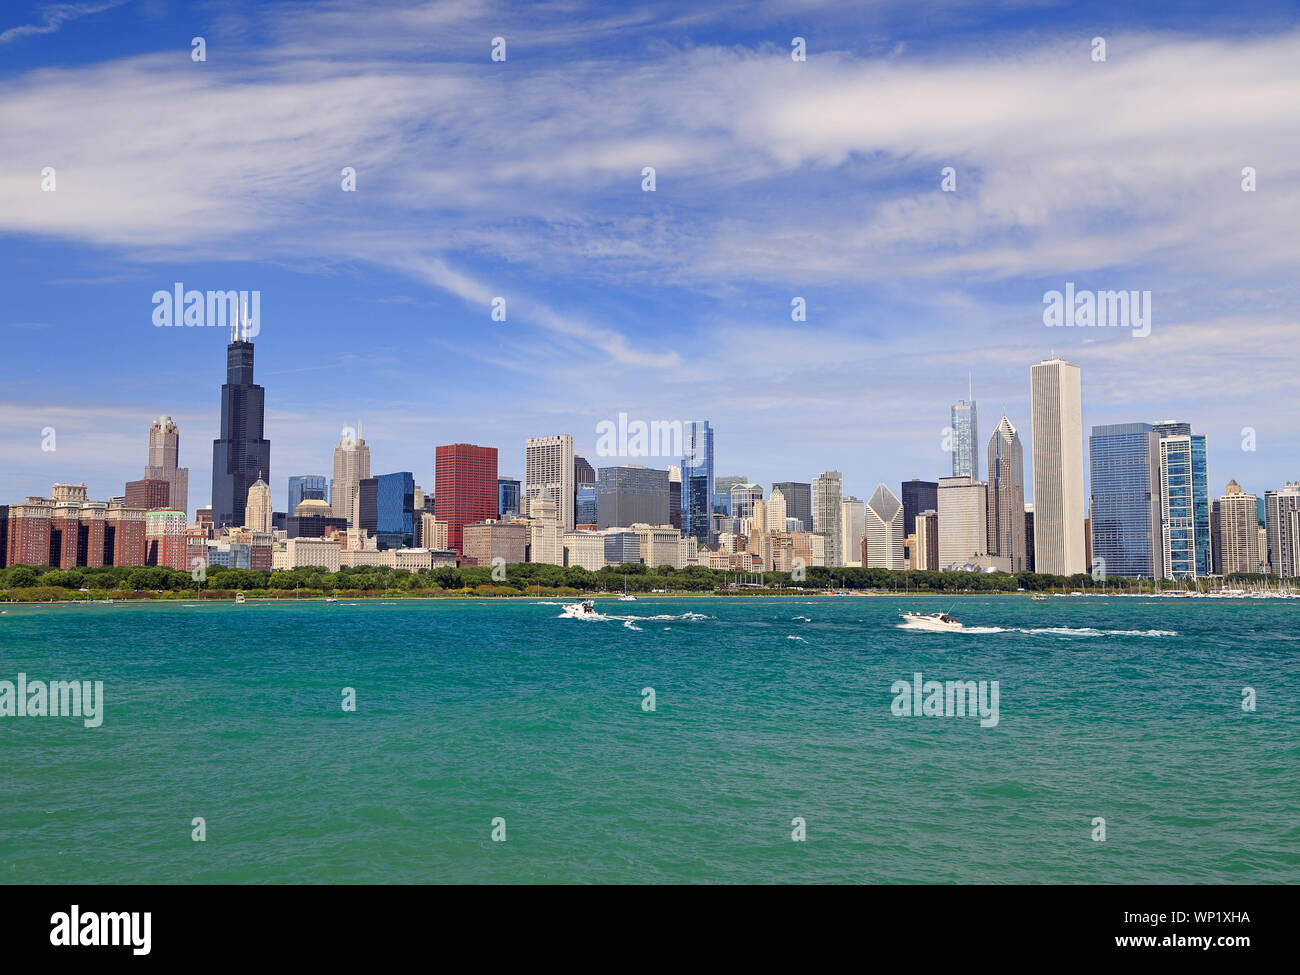 Chicago skyline with Lake Michigan on the foreground, IL, USA Stock Photo